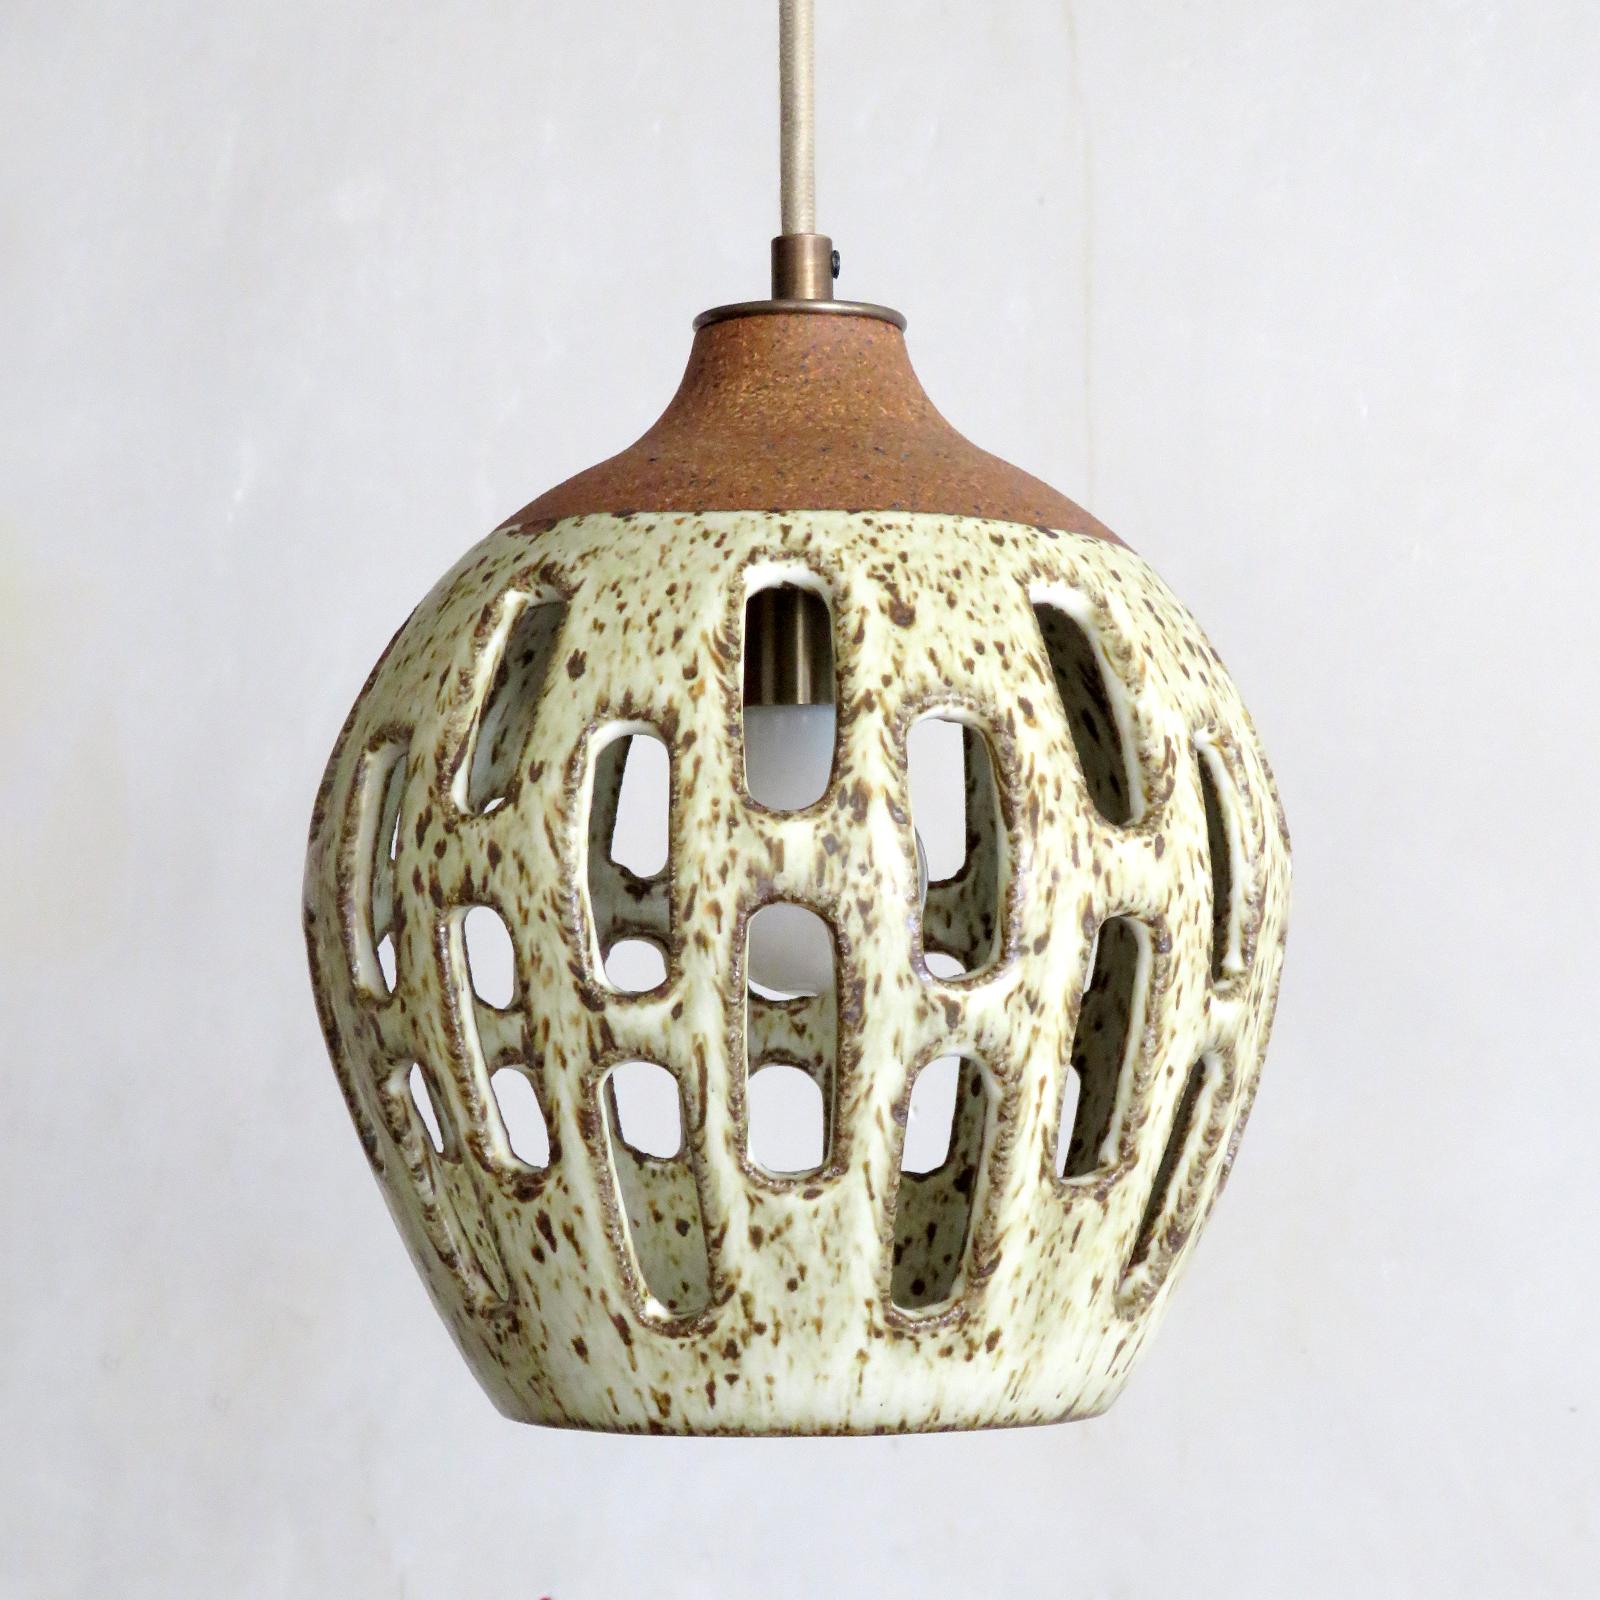 Wonderful ceramic pendant light No. 1003, designed and handcrafted by Los Angeles based ceramicist Heather Levine. High fired stoneware with speckled matte white glaze on a cork colored clay body with decorative cut outs to expose light in patterns